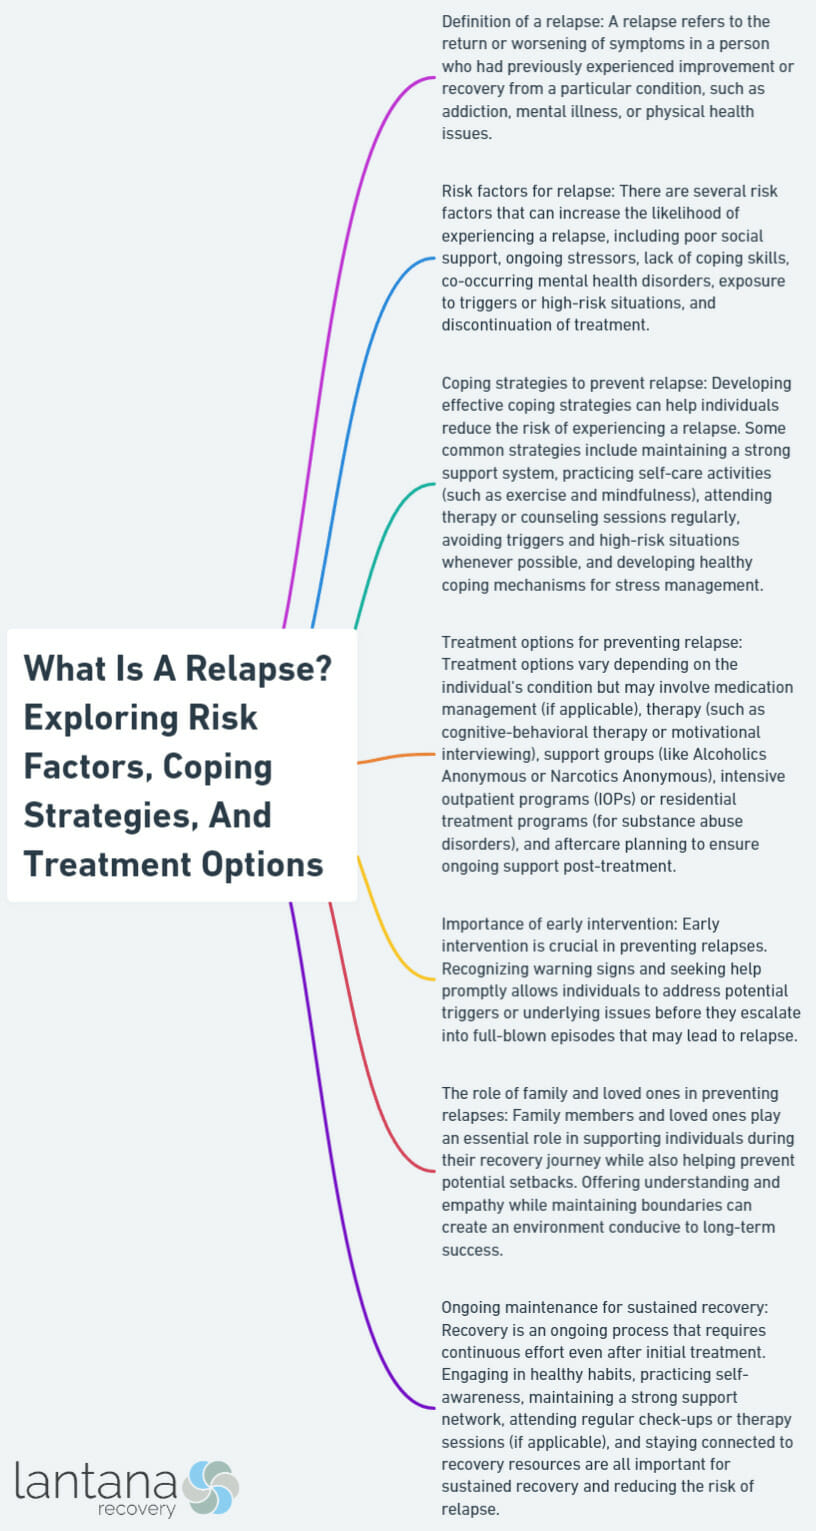 What Is A Relapse? Exploring Risk Factors, Coping Strategies, And Treatment Options
